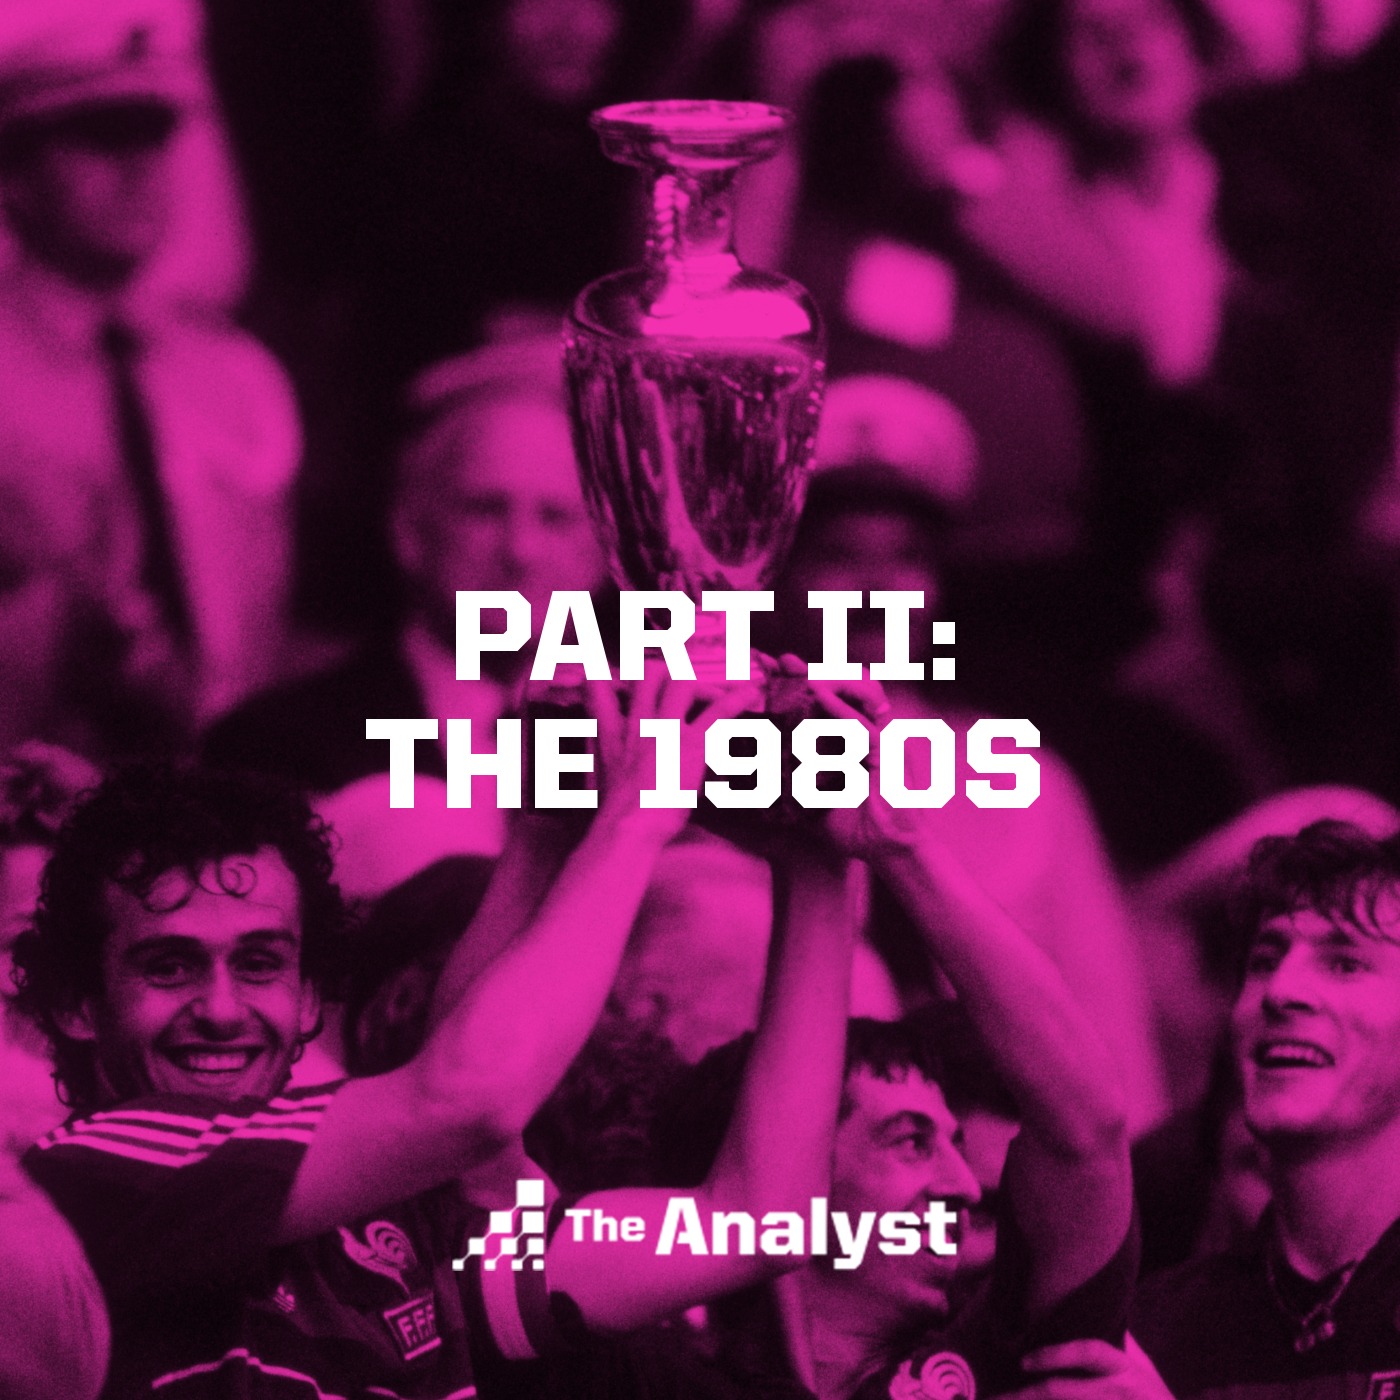 History of the European Championship Part II: The 1980s